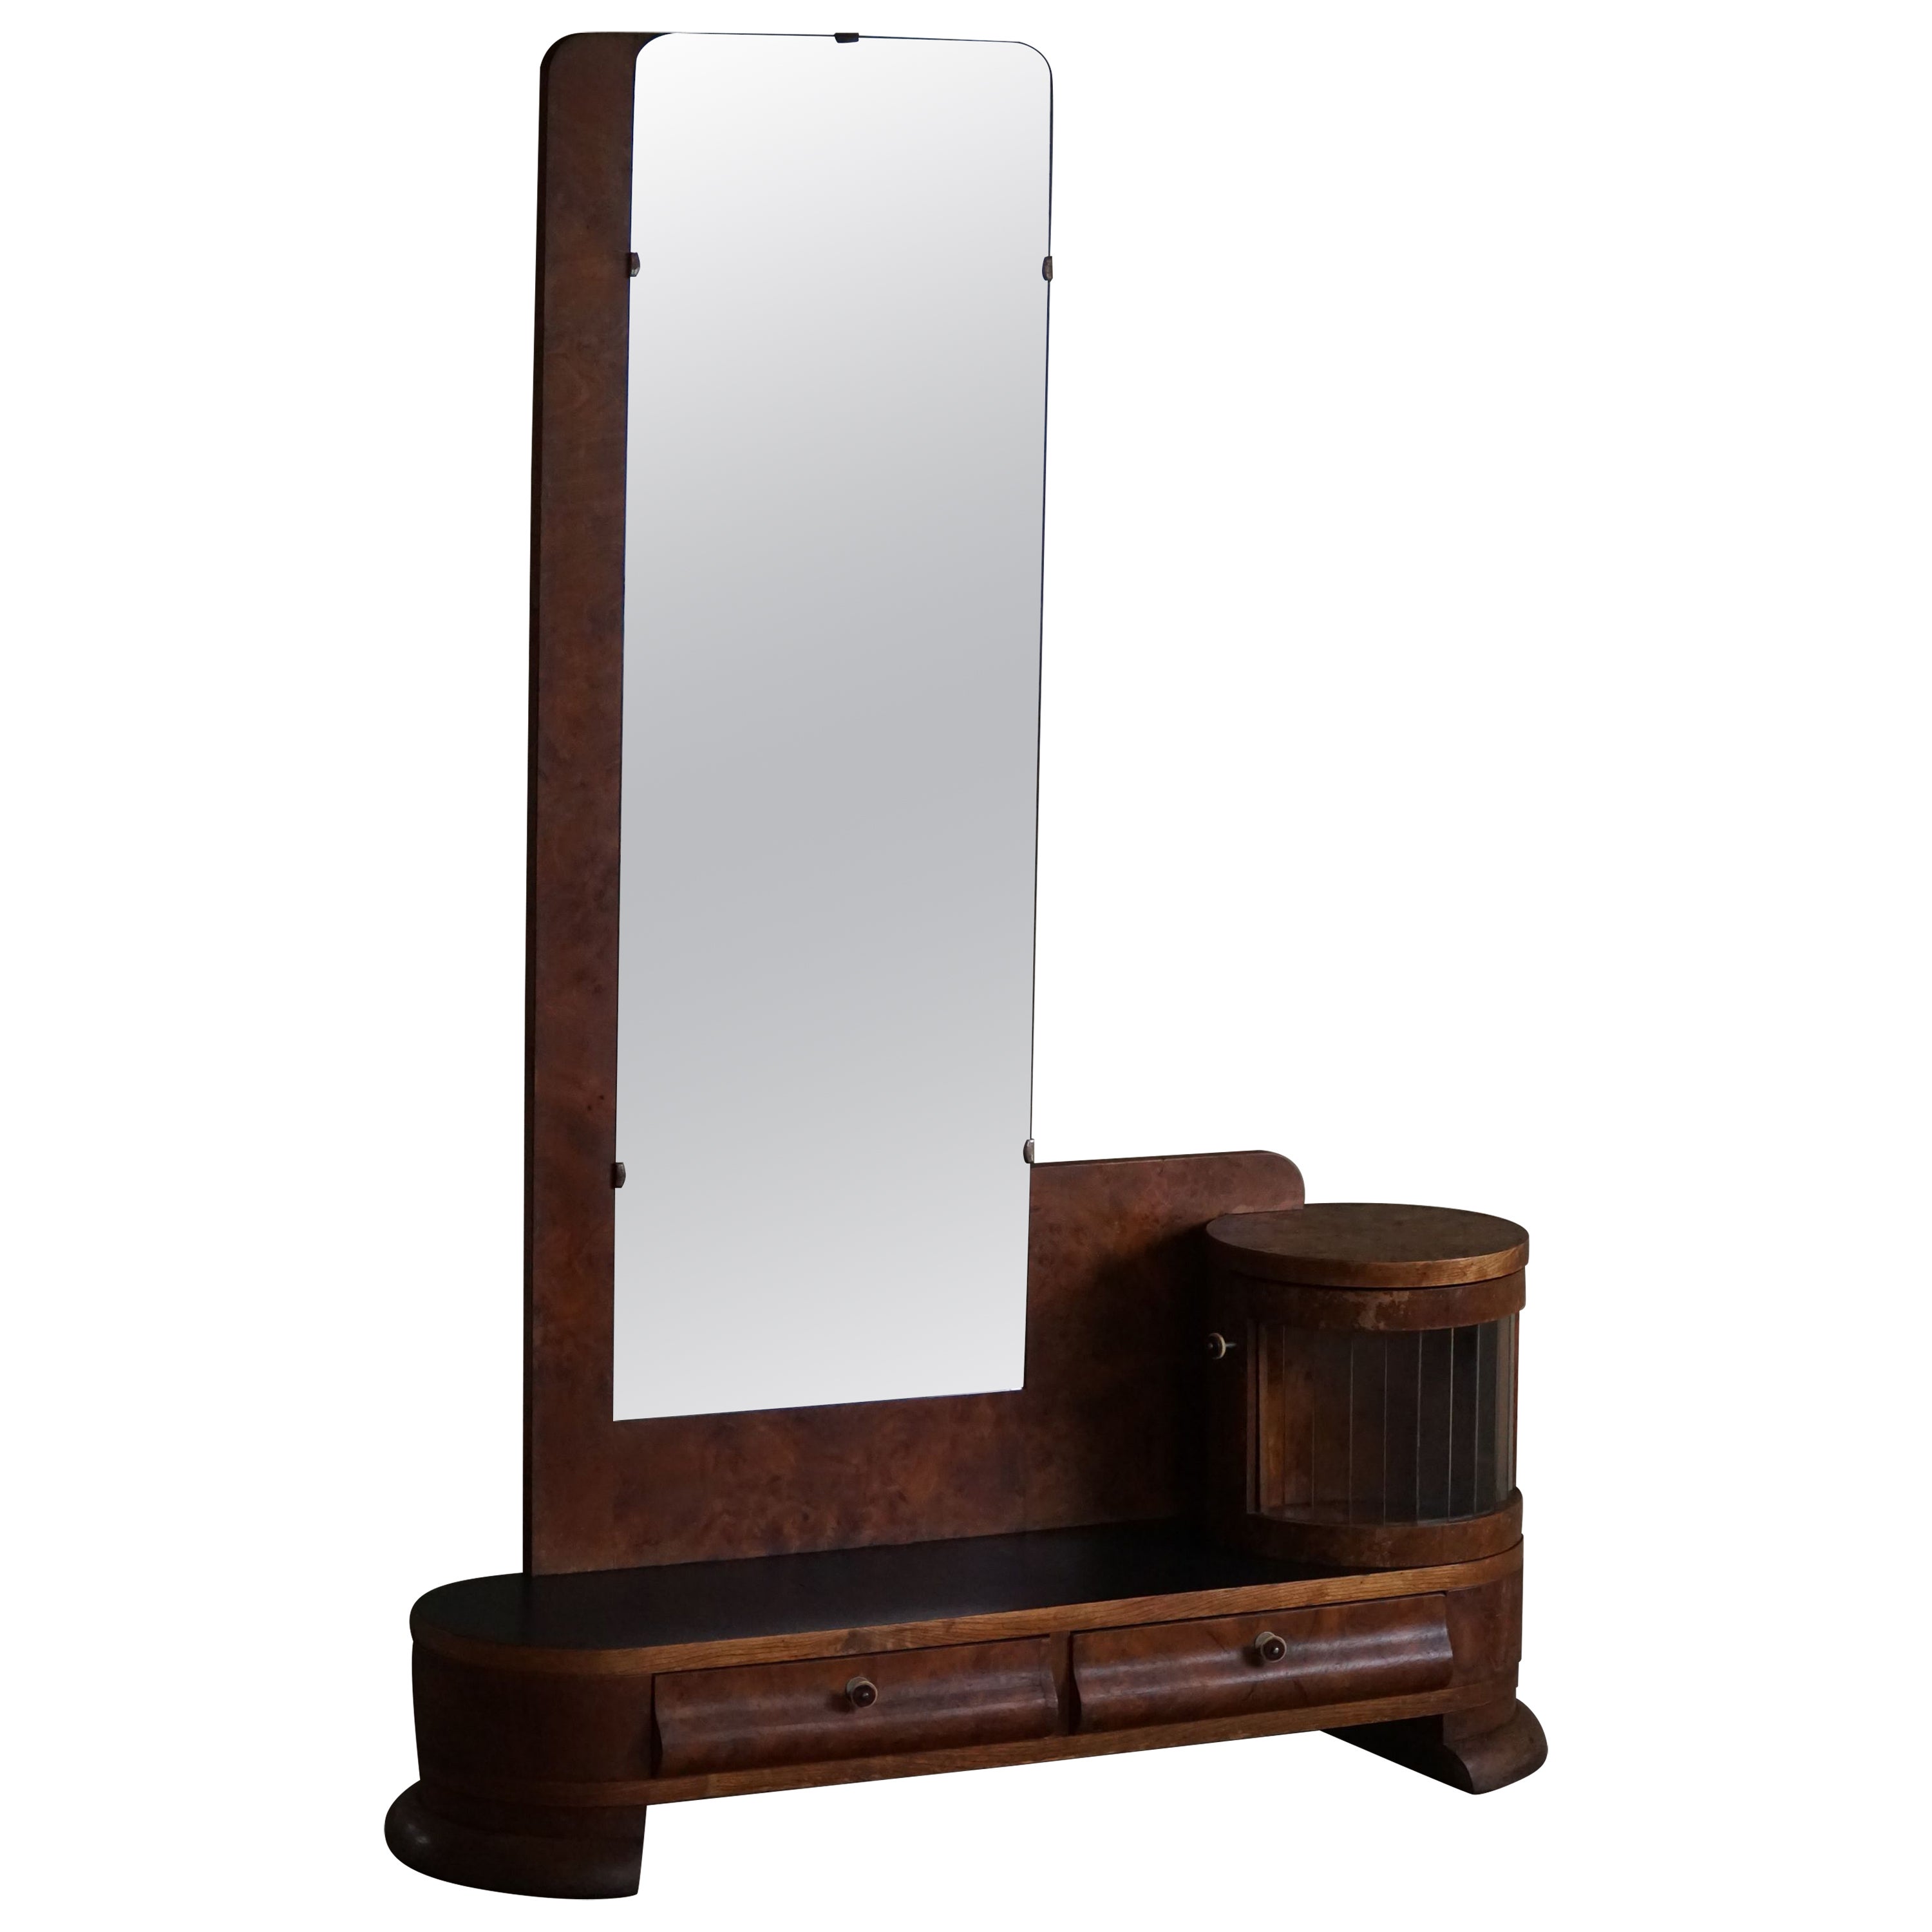 Danish Art Deco, Entry Console in Walnut with Mirror, Early 20th Century For Sale